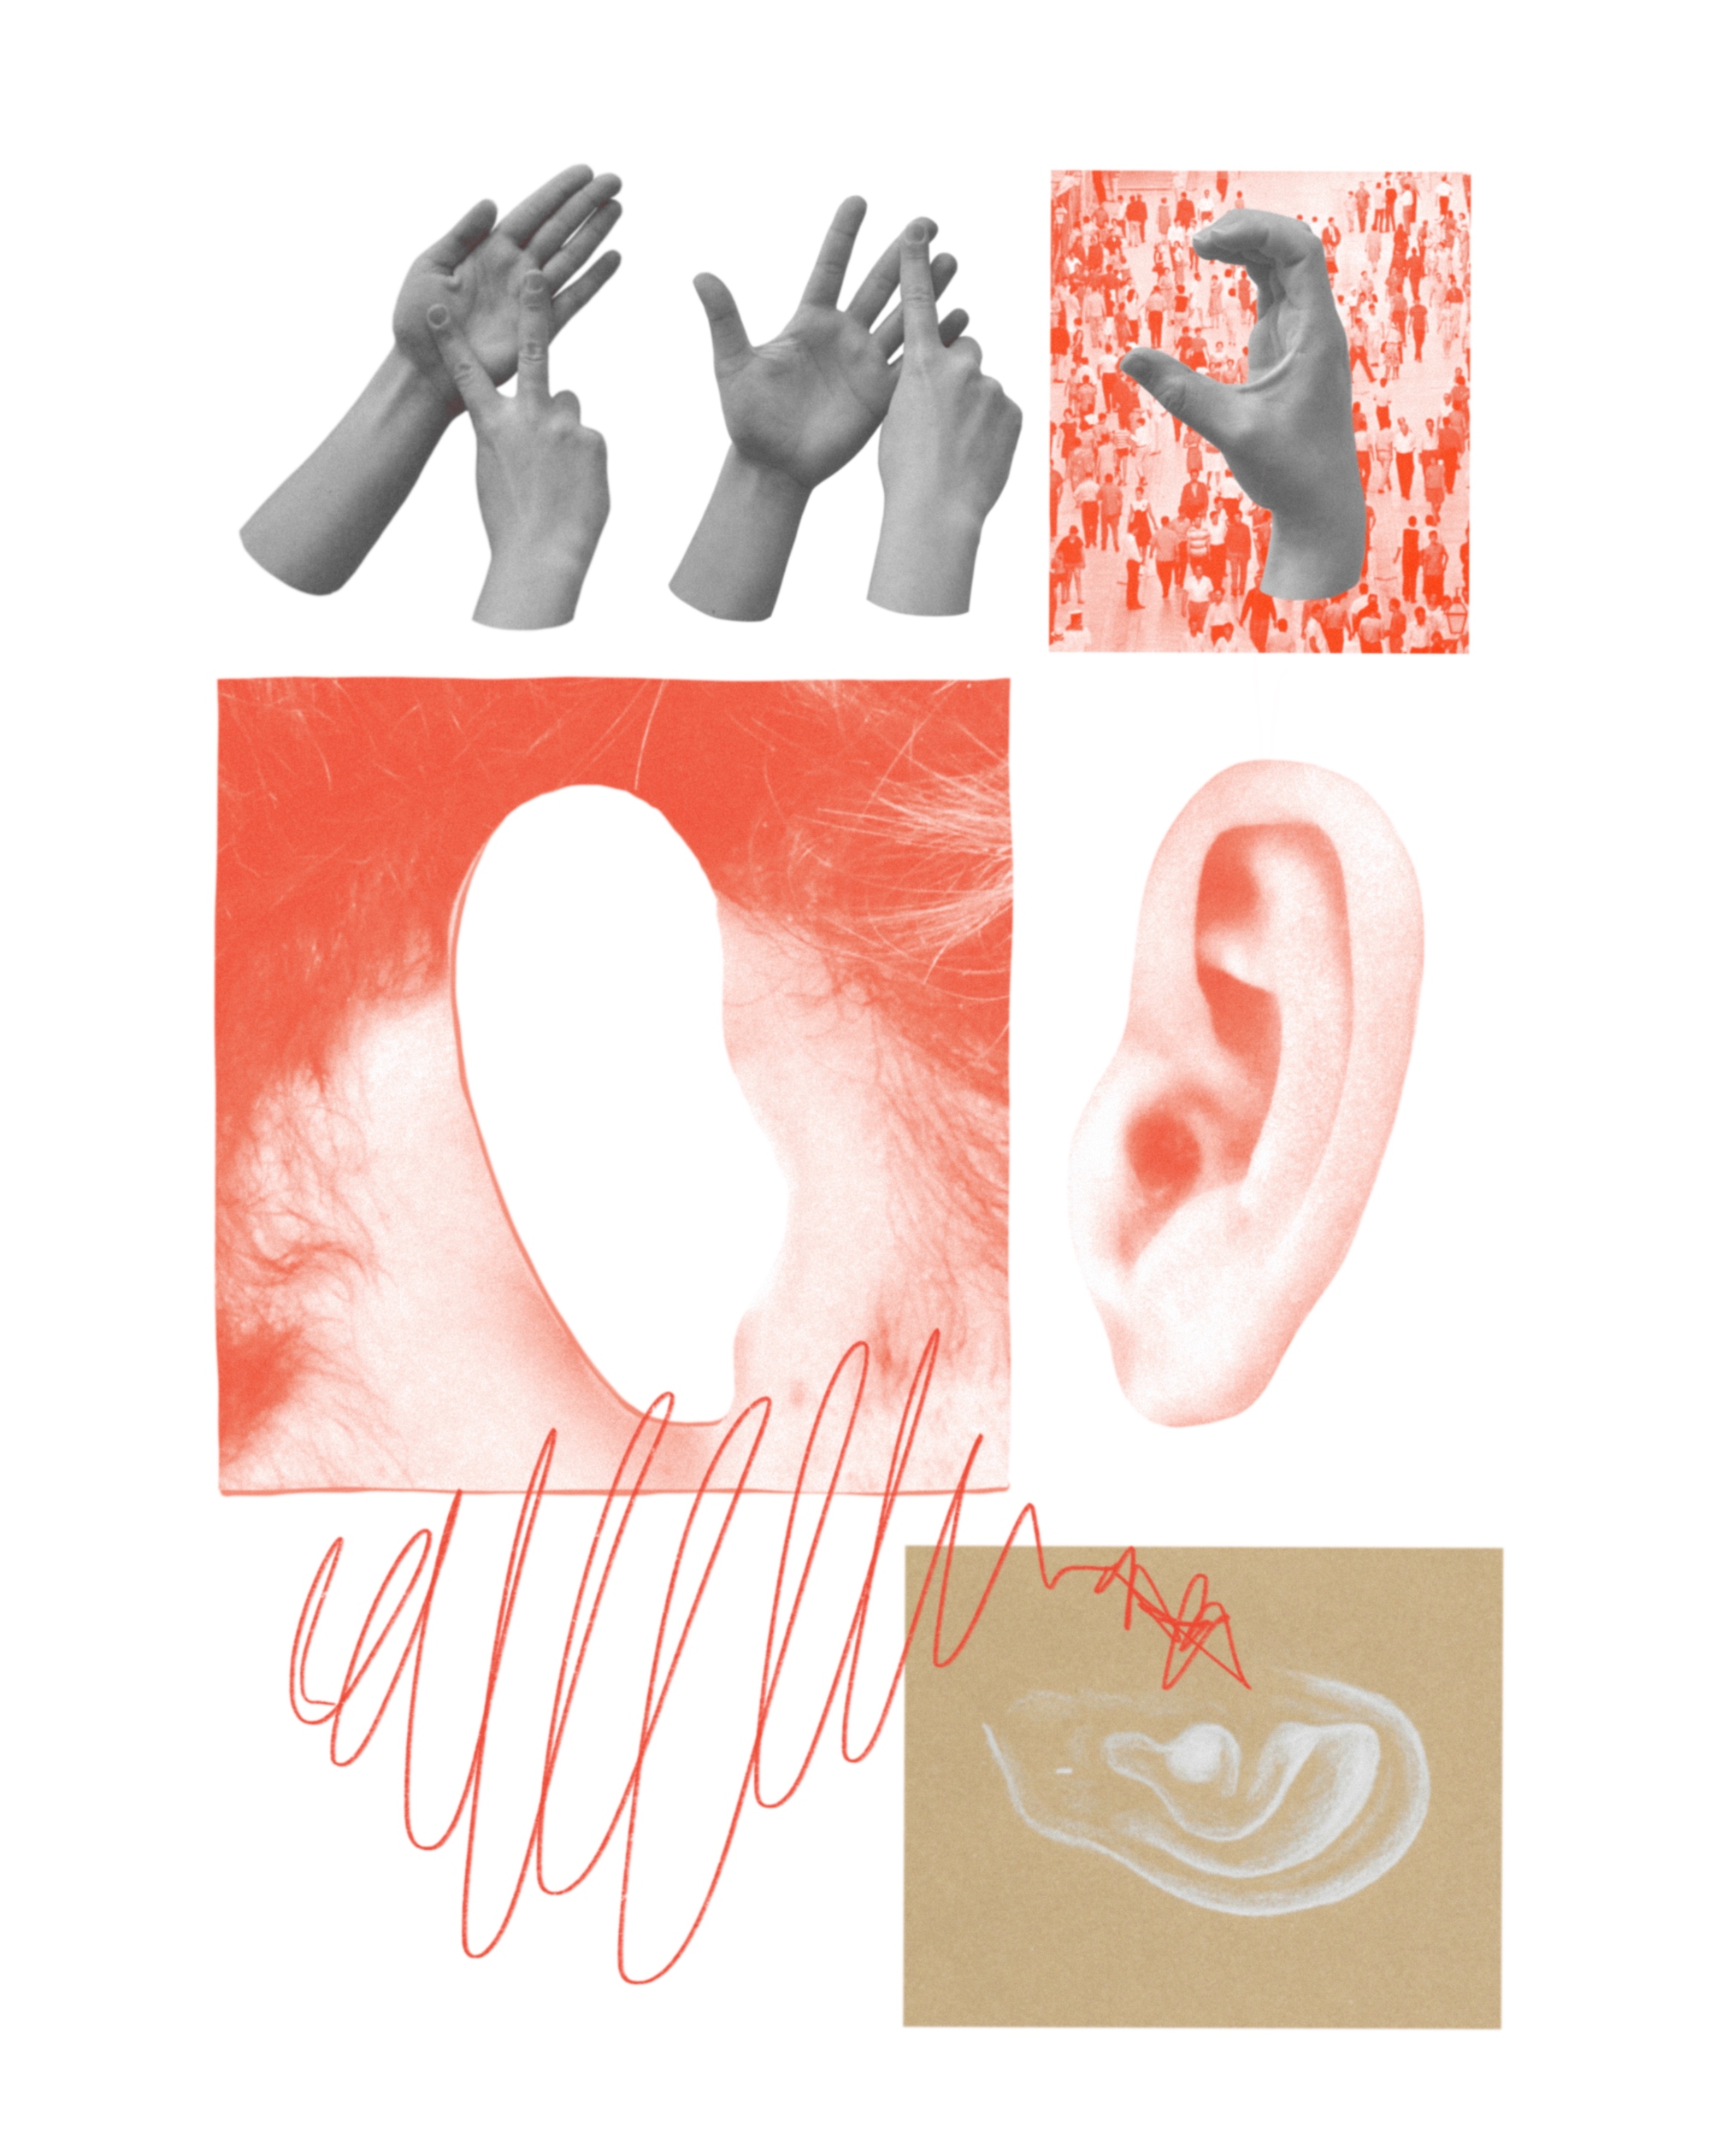 Image showing hands signing ‘VIC’ along with illustrations of ears. 